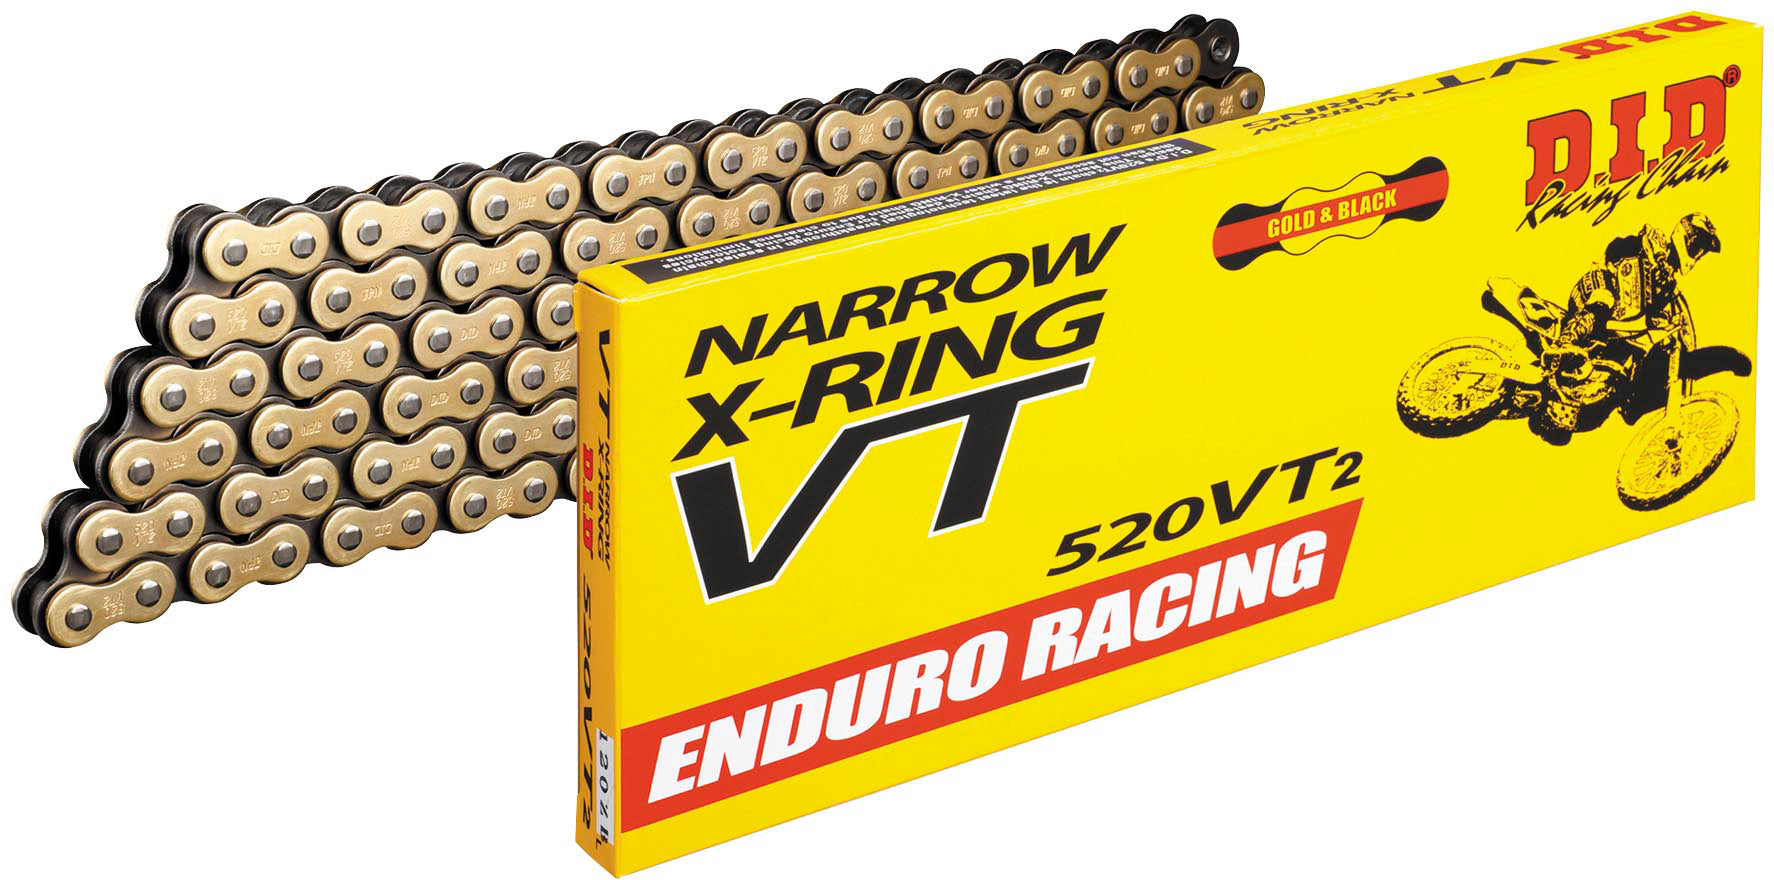 520 ERVT Gold and Black Motorcycle Chain, 120 Links